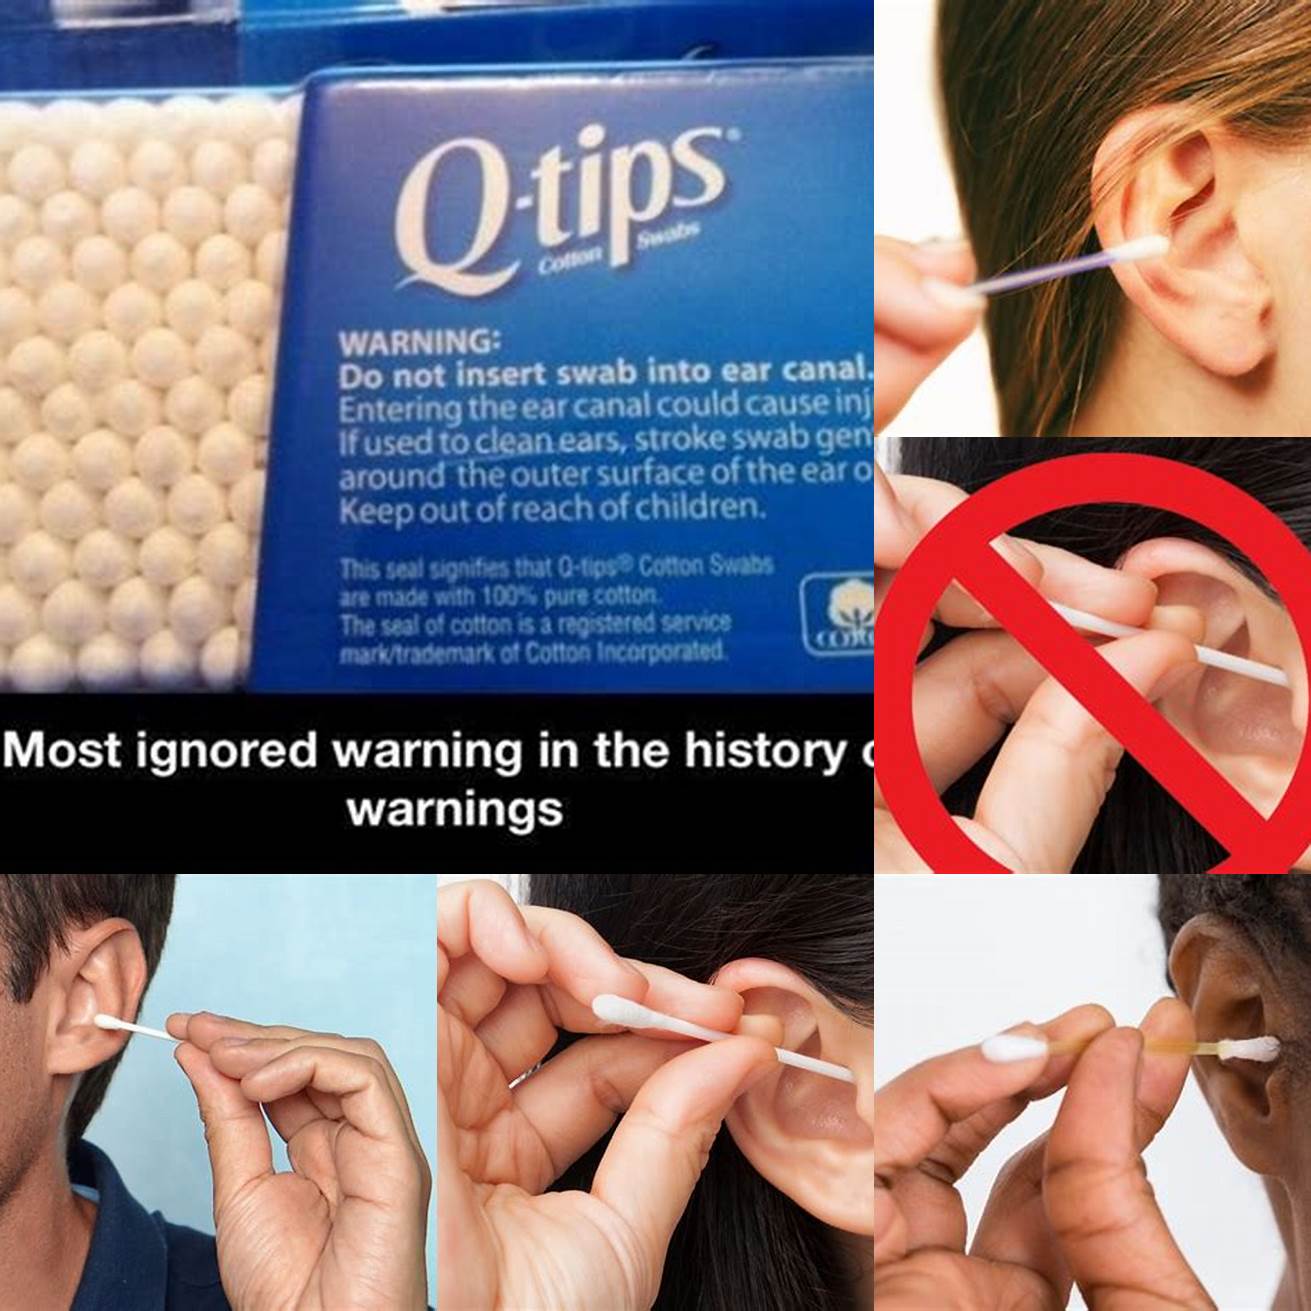 Do not insert anything into the ear canal including cotton swabs or your finger